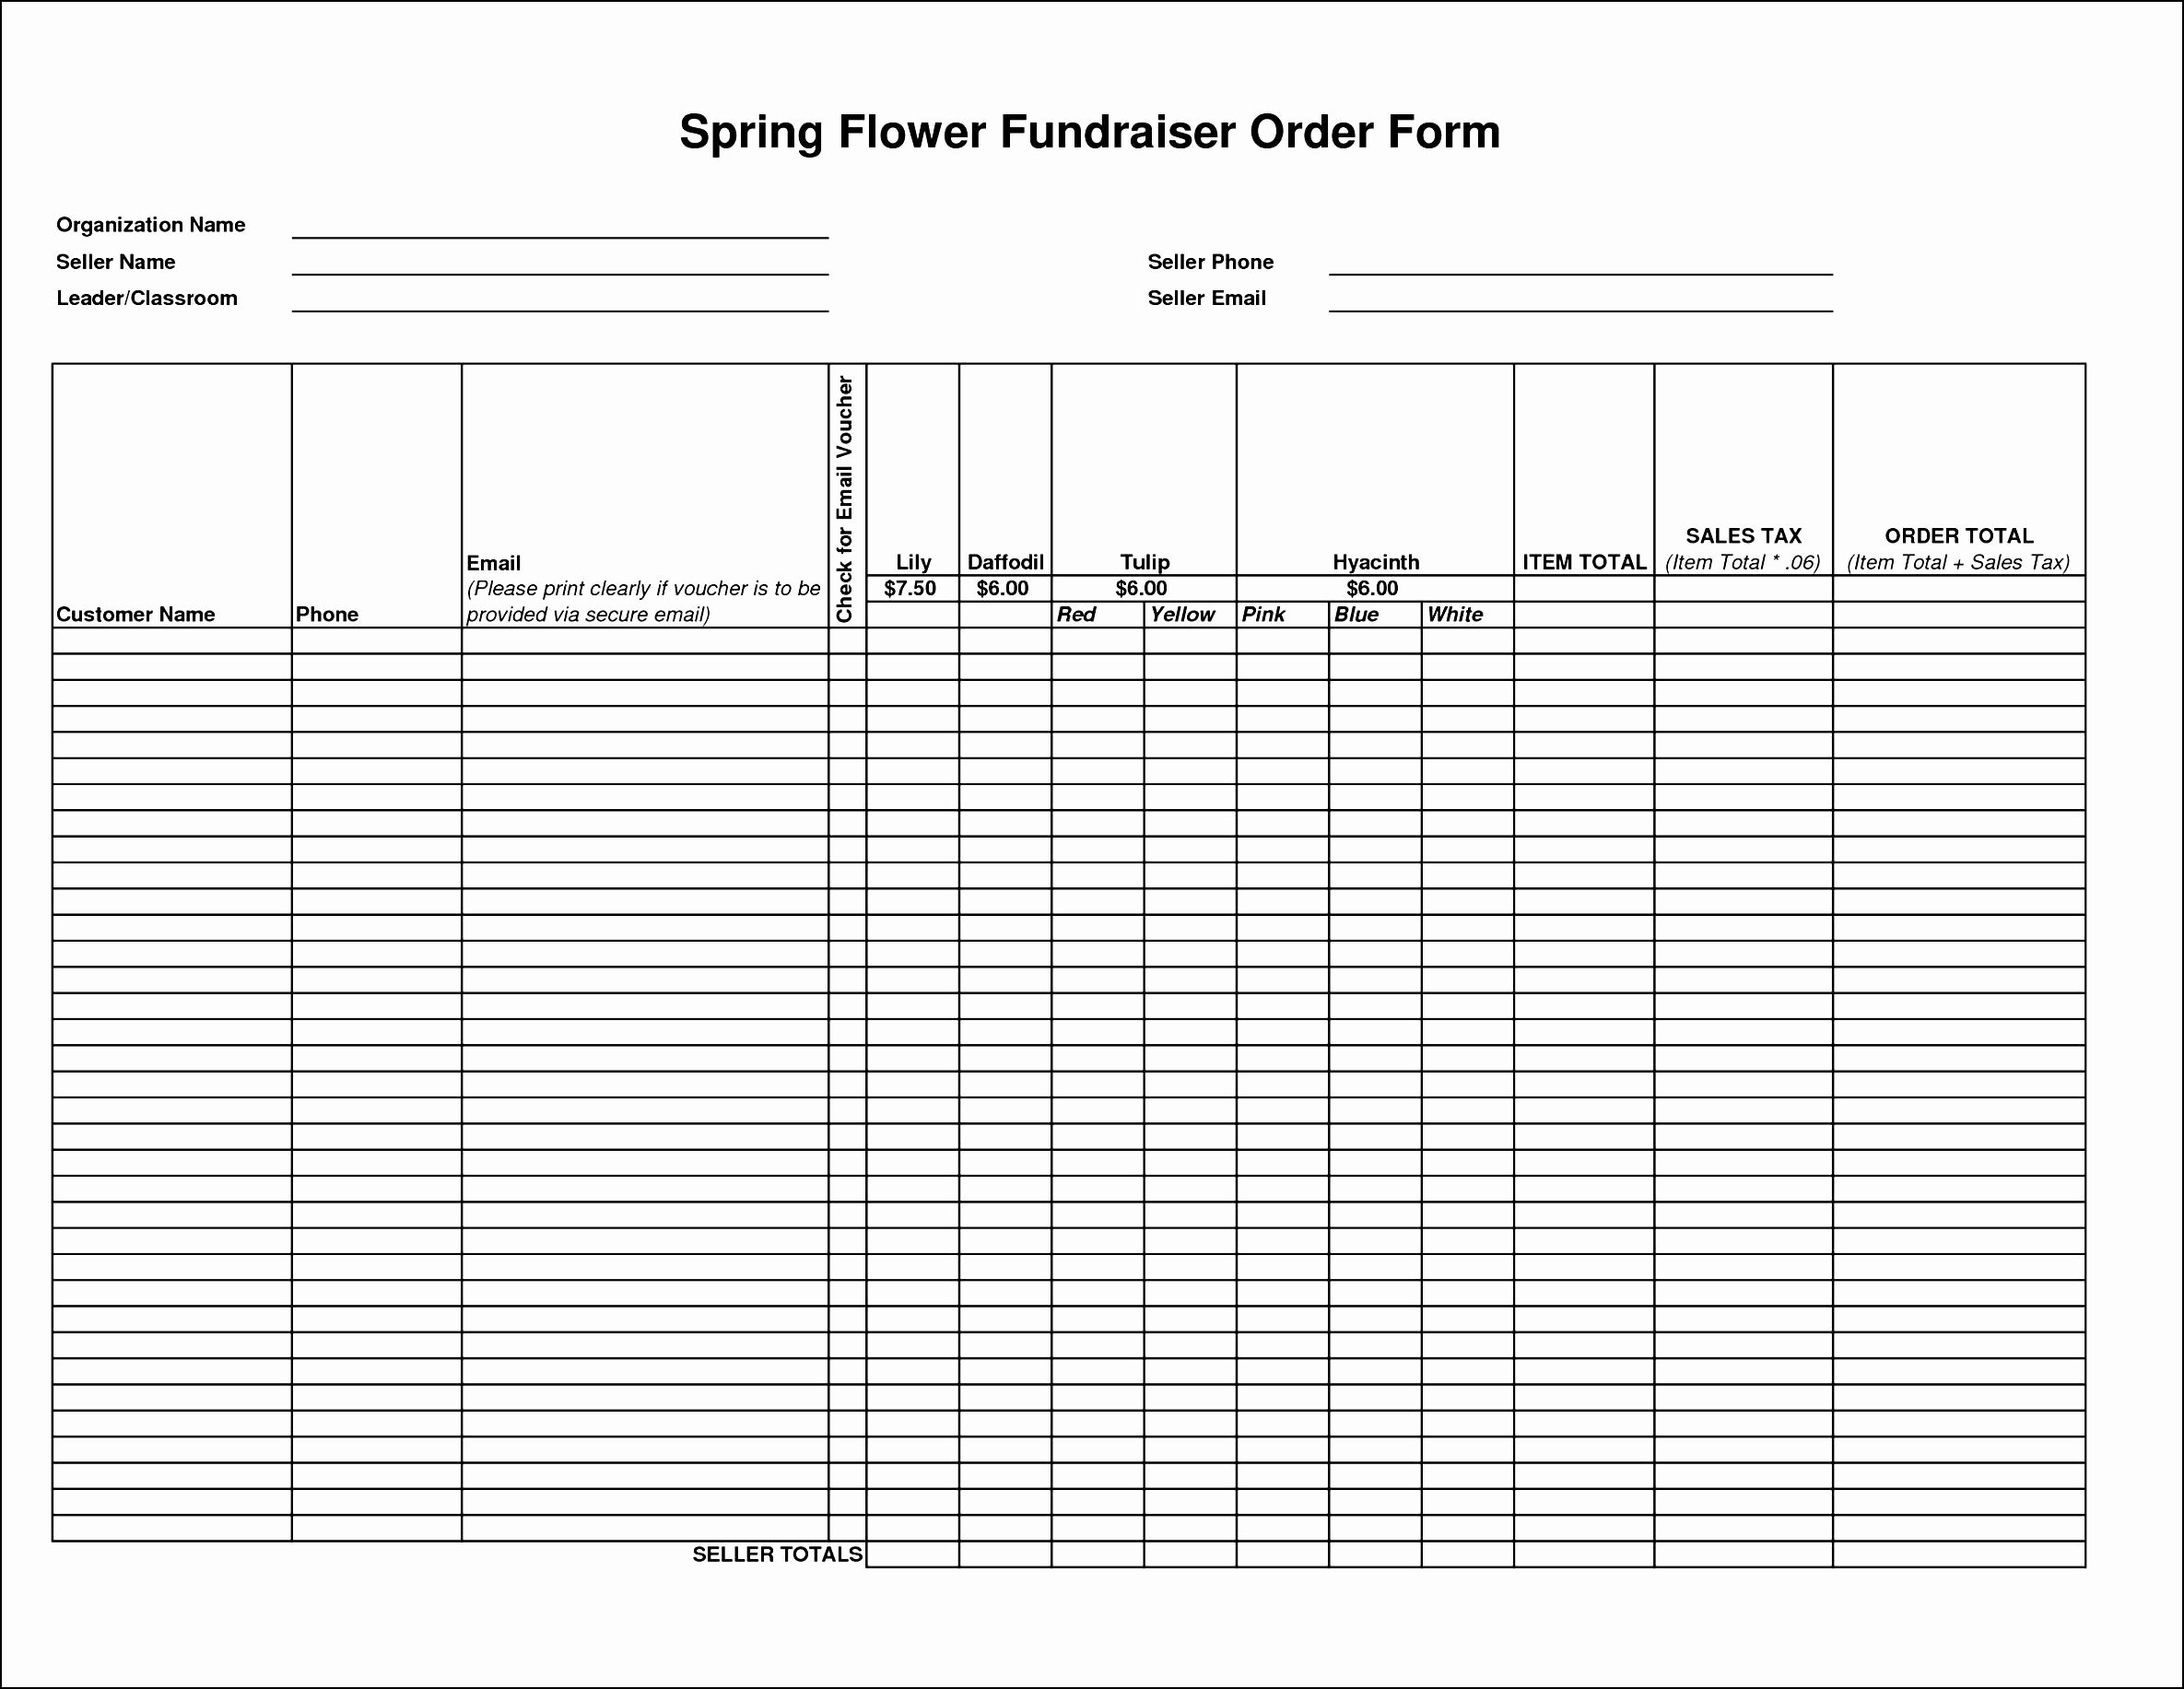 Fundraiser order form Template Free Best Of Collection solutions Flower Fundraiser order forms